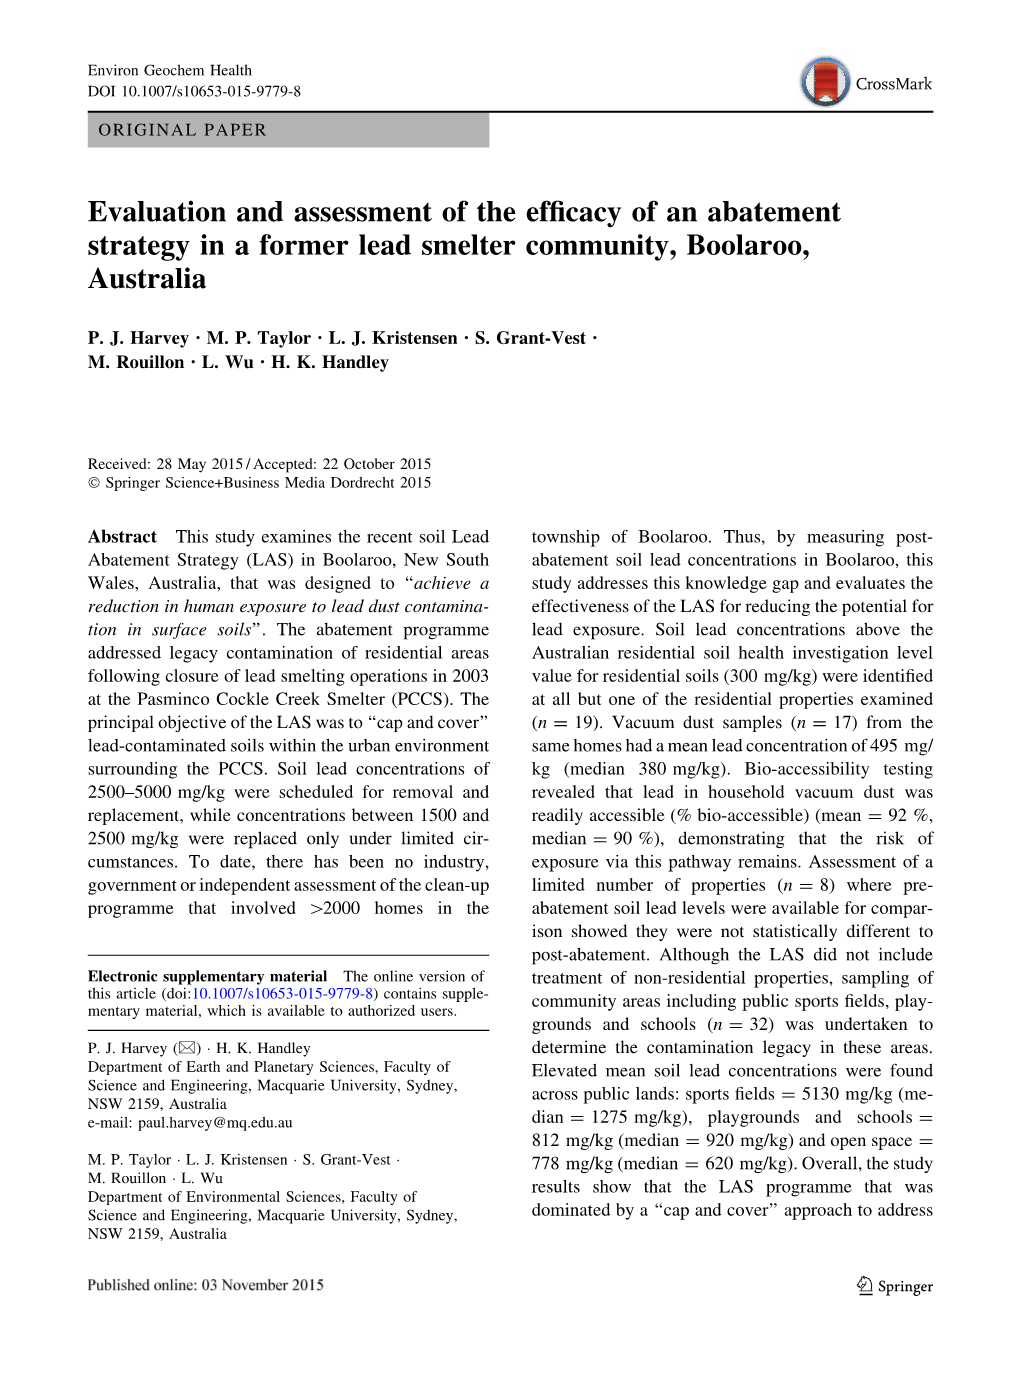 Evaluation and Assessment of the Efficacy of an Abatement Strategy In